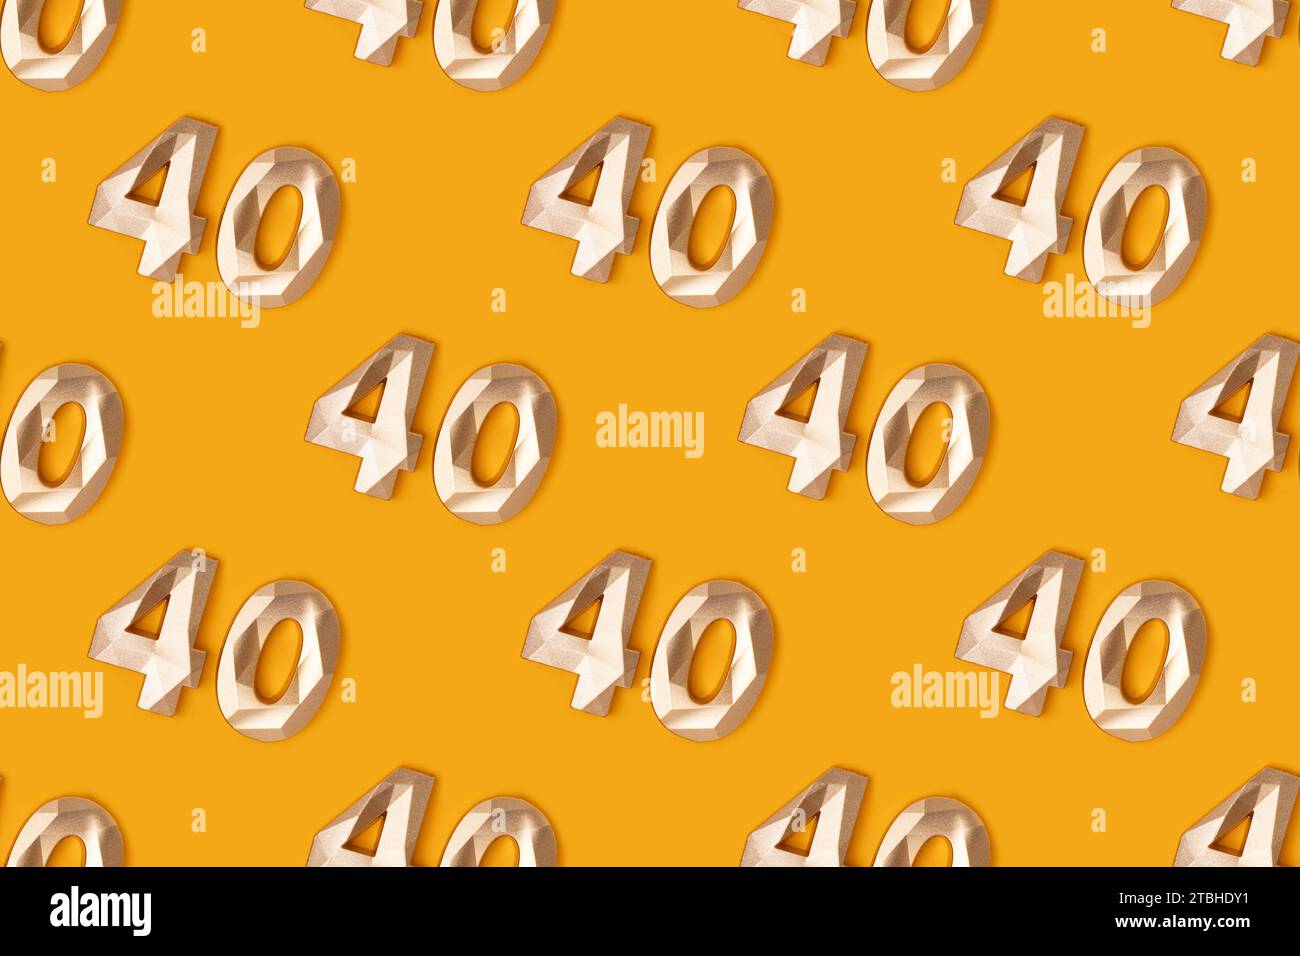 Repetitive pattern made of golden number 40 on a yellow background. Stock Photo